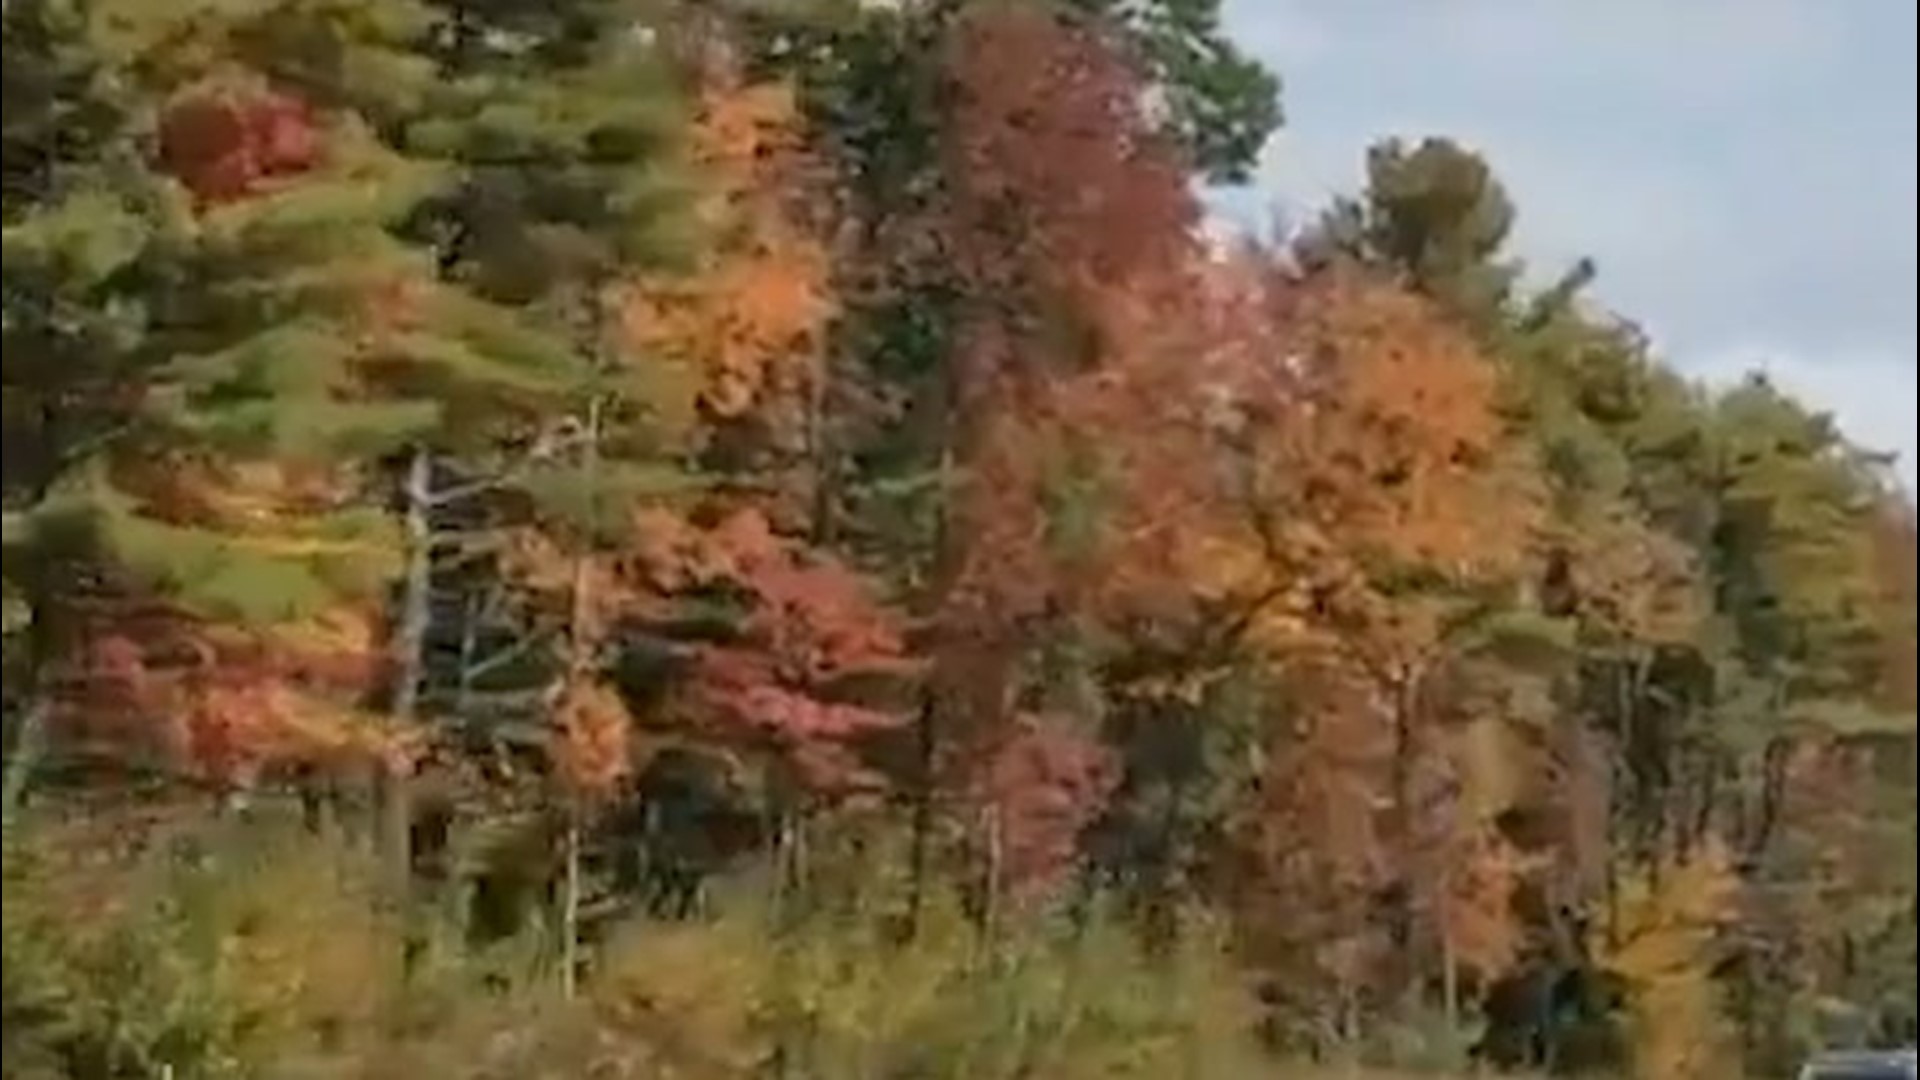 A motorist driving northbound on Interstate 95 in Sabattus, Maine, captured fall foliage lining up alongside the highway on Sept. 29.